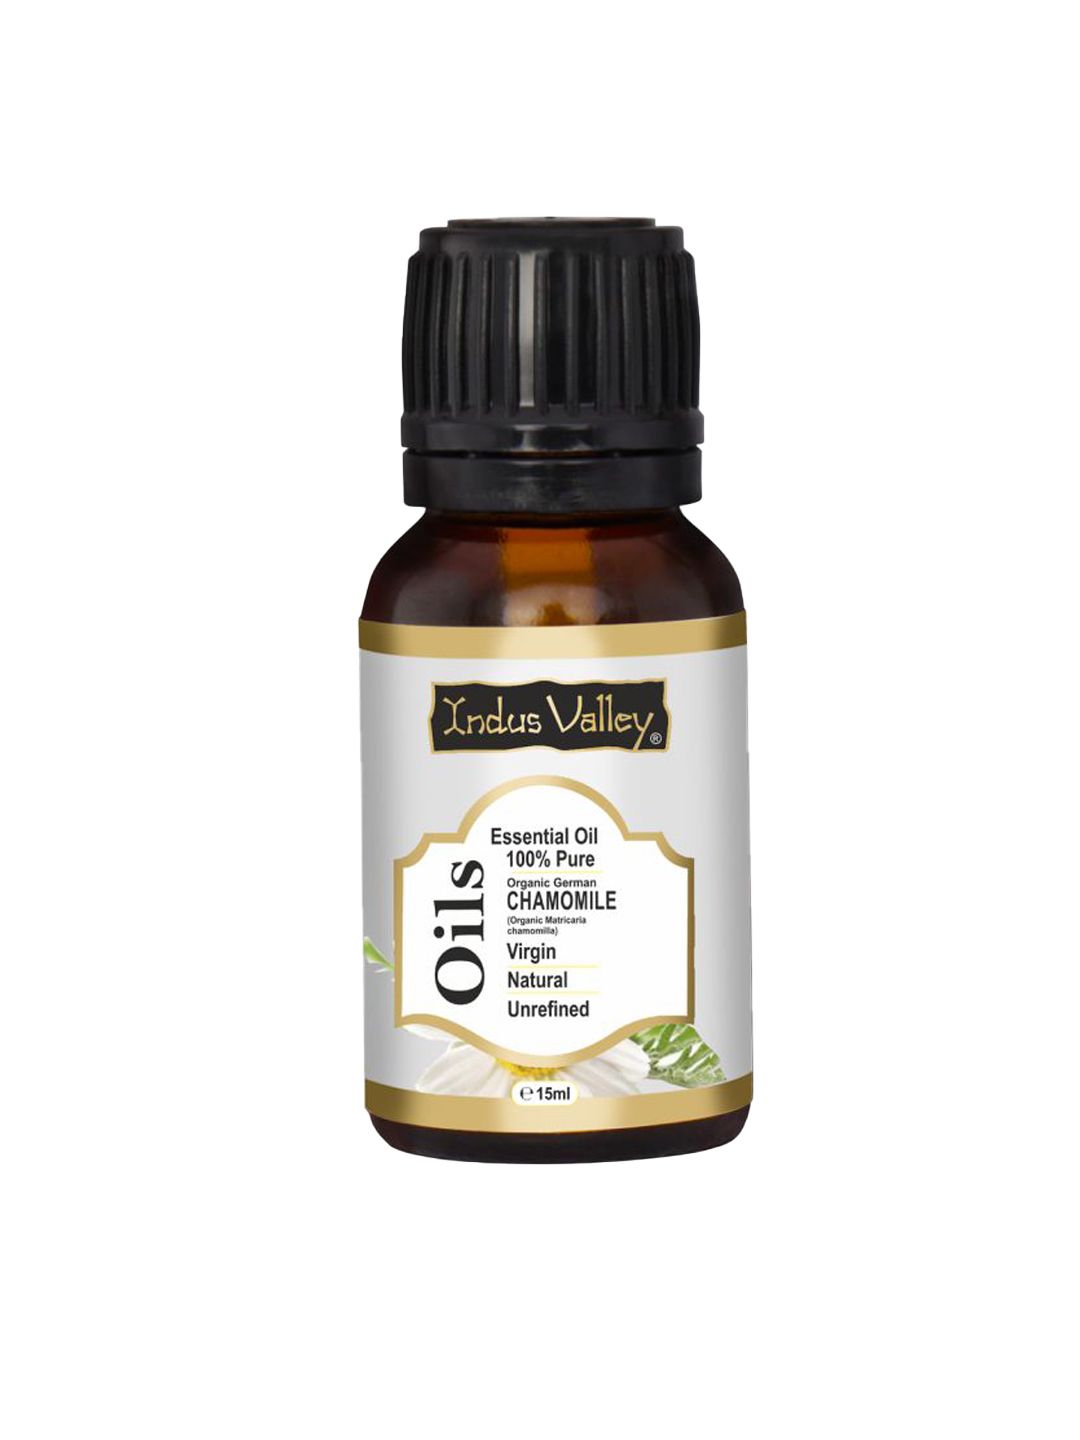 Indus Valley Chamomile Essential Oil 15 ml Price in India